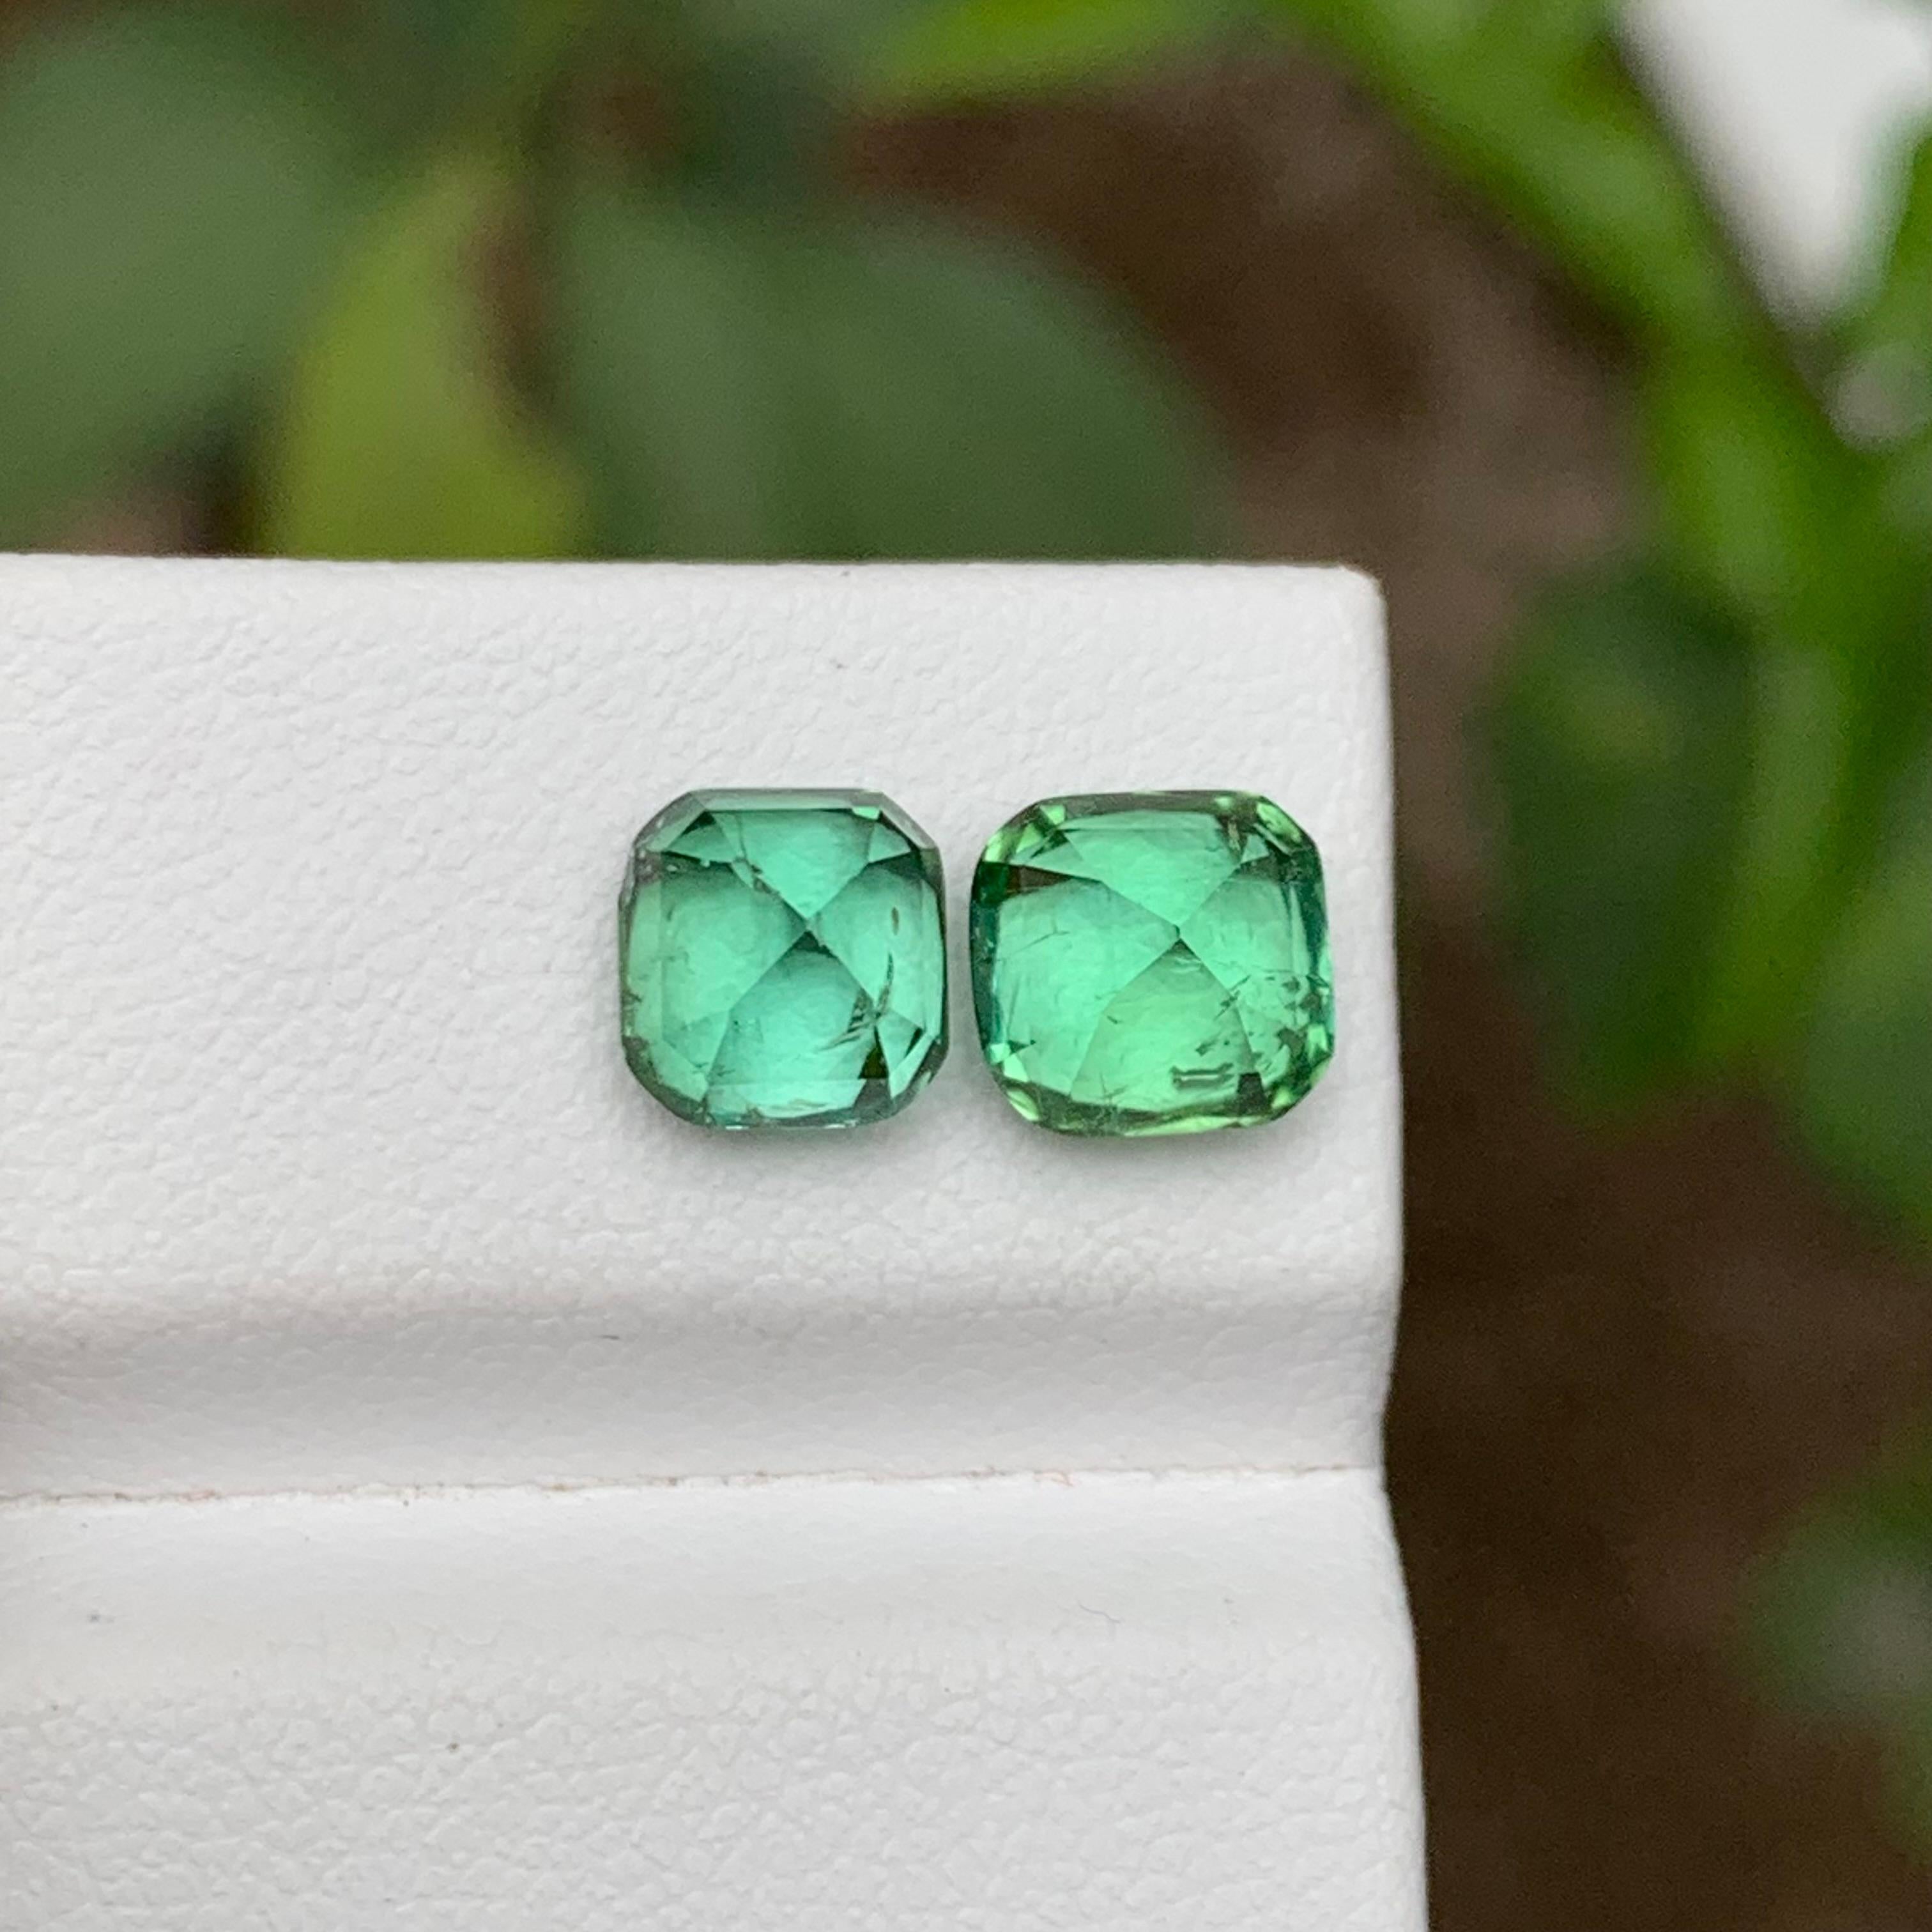 Women's or Men's Rare Mint Green Natural Tourmaline Gemstones, 3.75 Ct Cushion Cut for Jewelry 